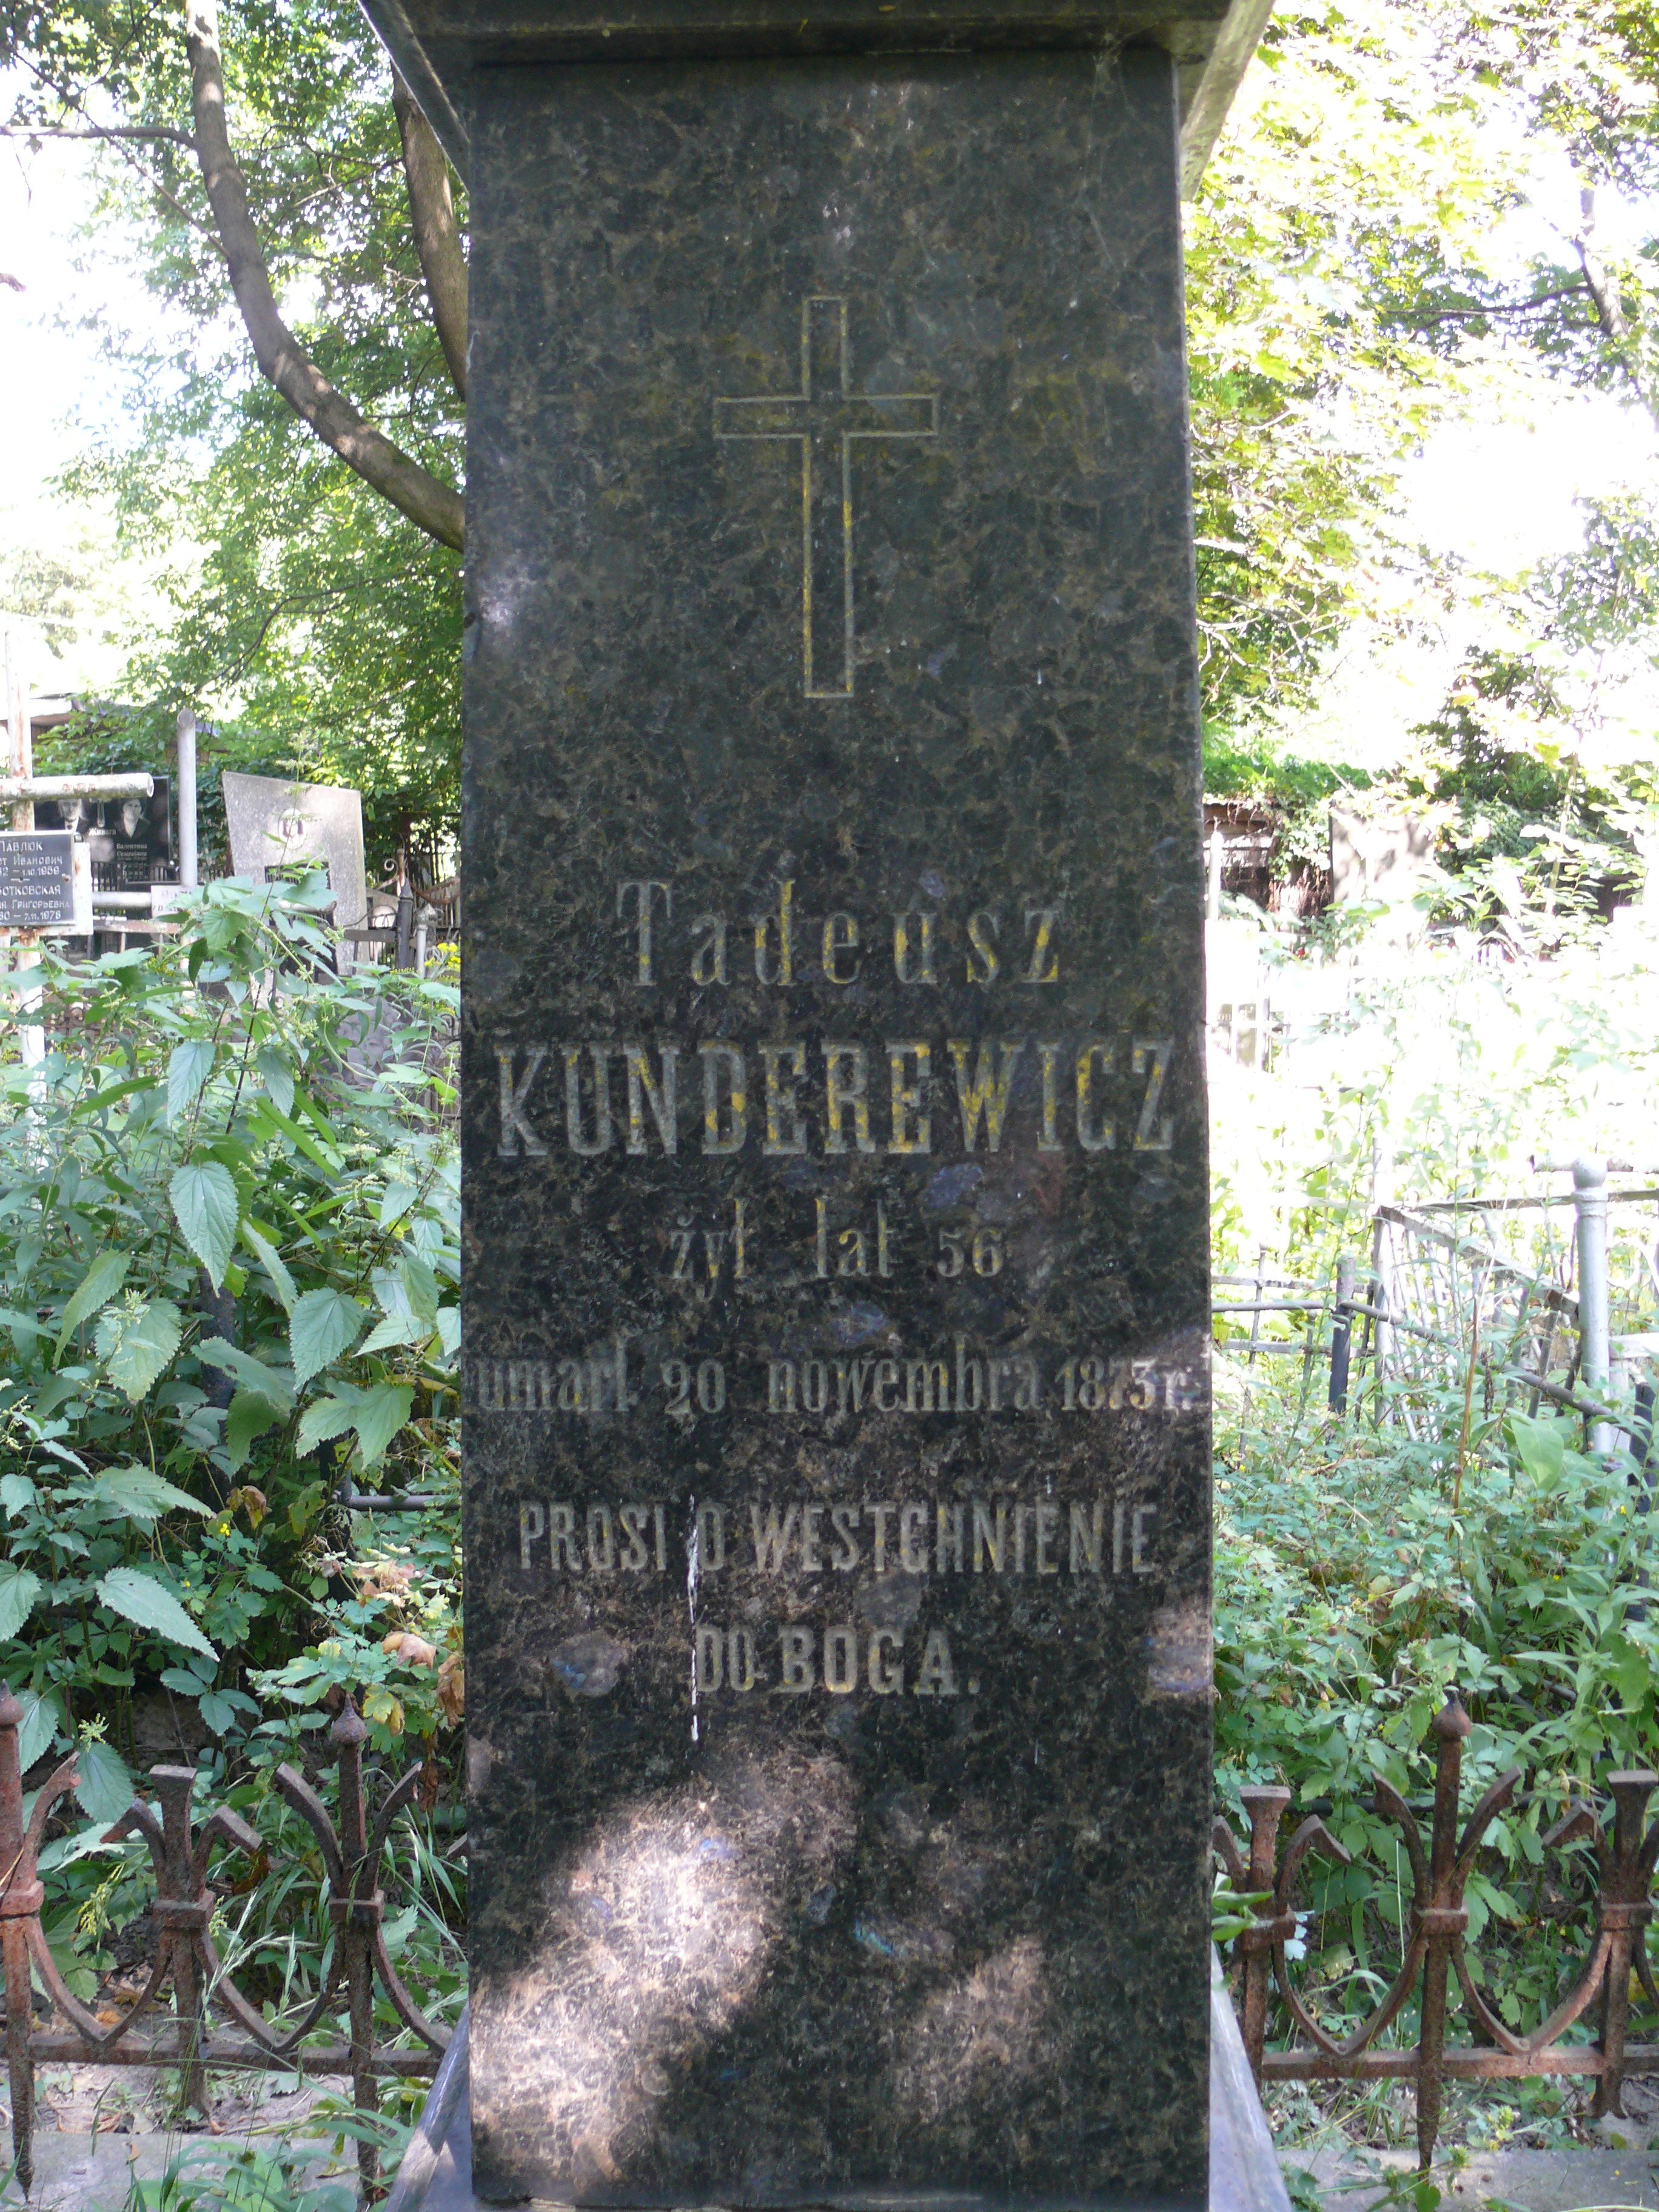 Inscription from the tombstone of Tadeusz Kunderewicz